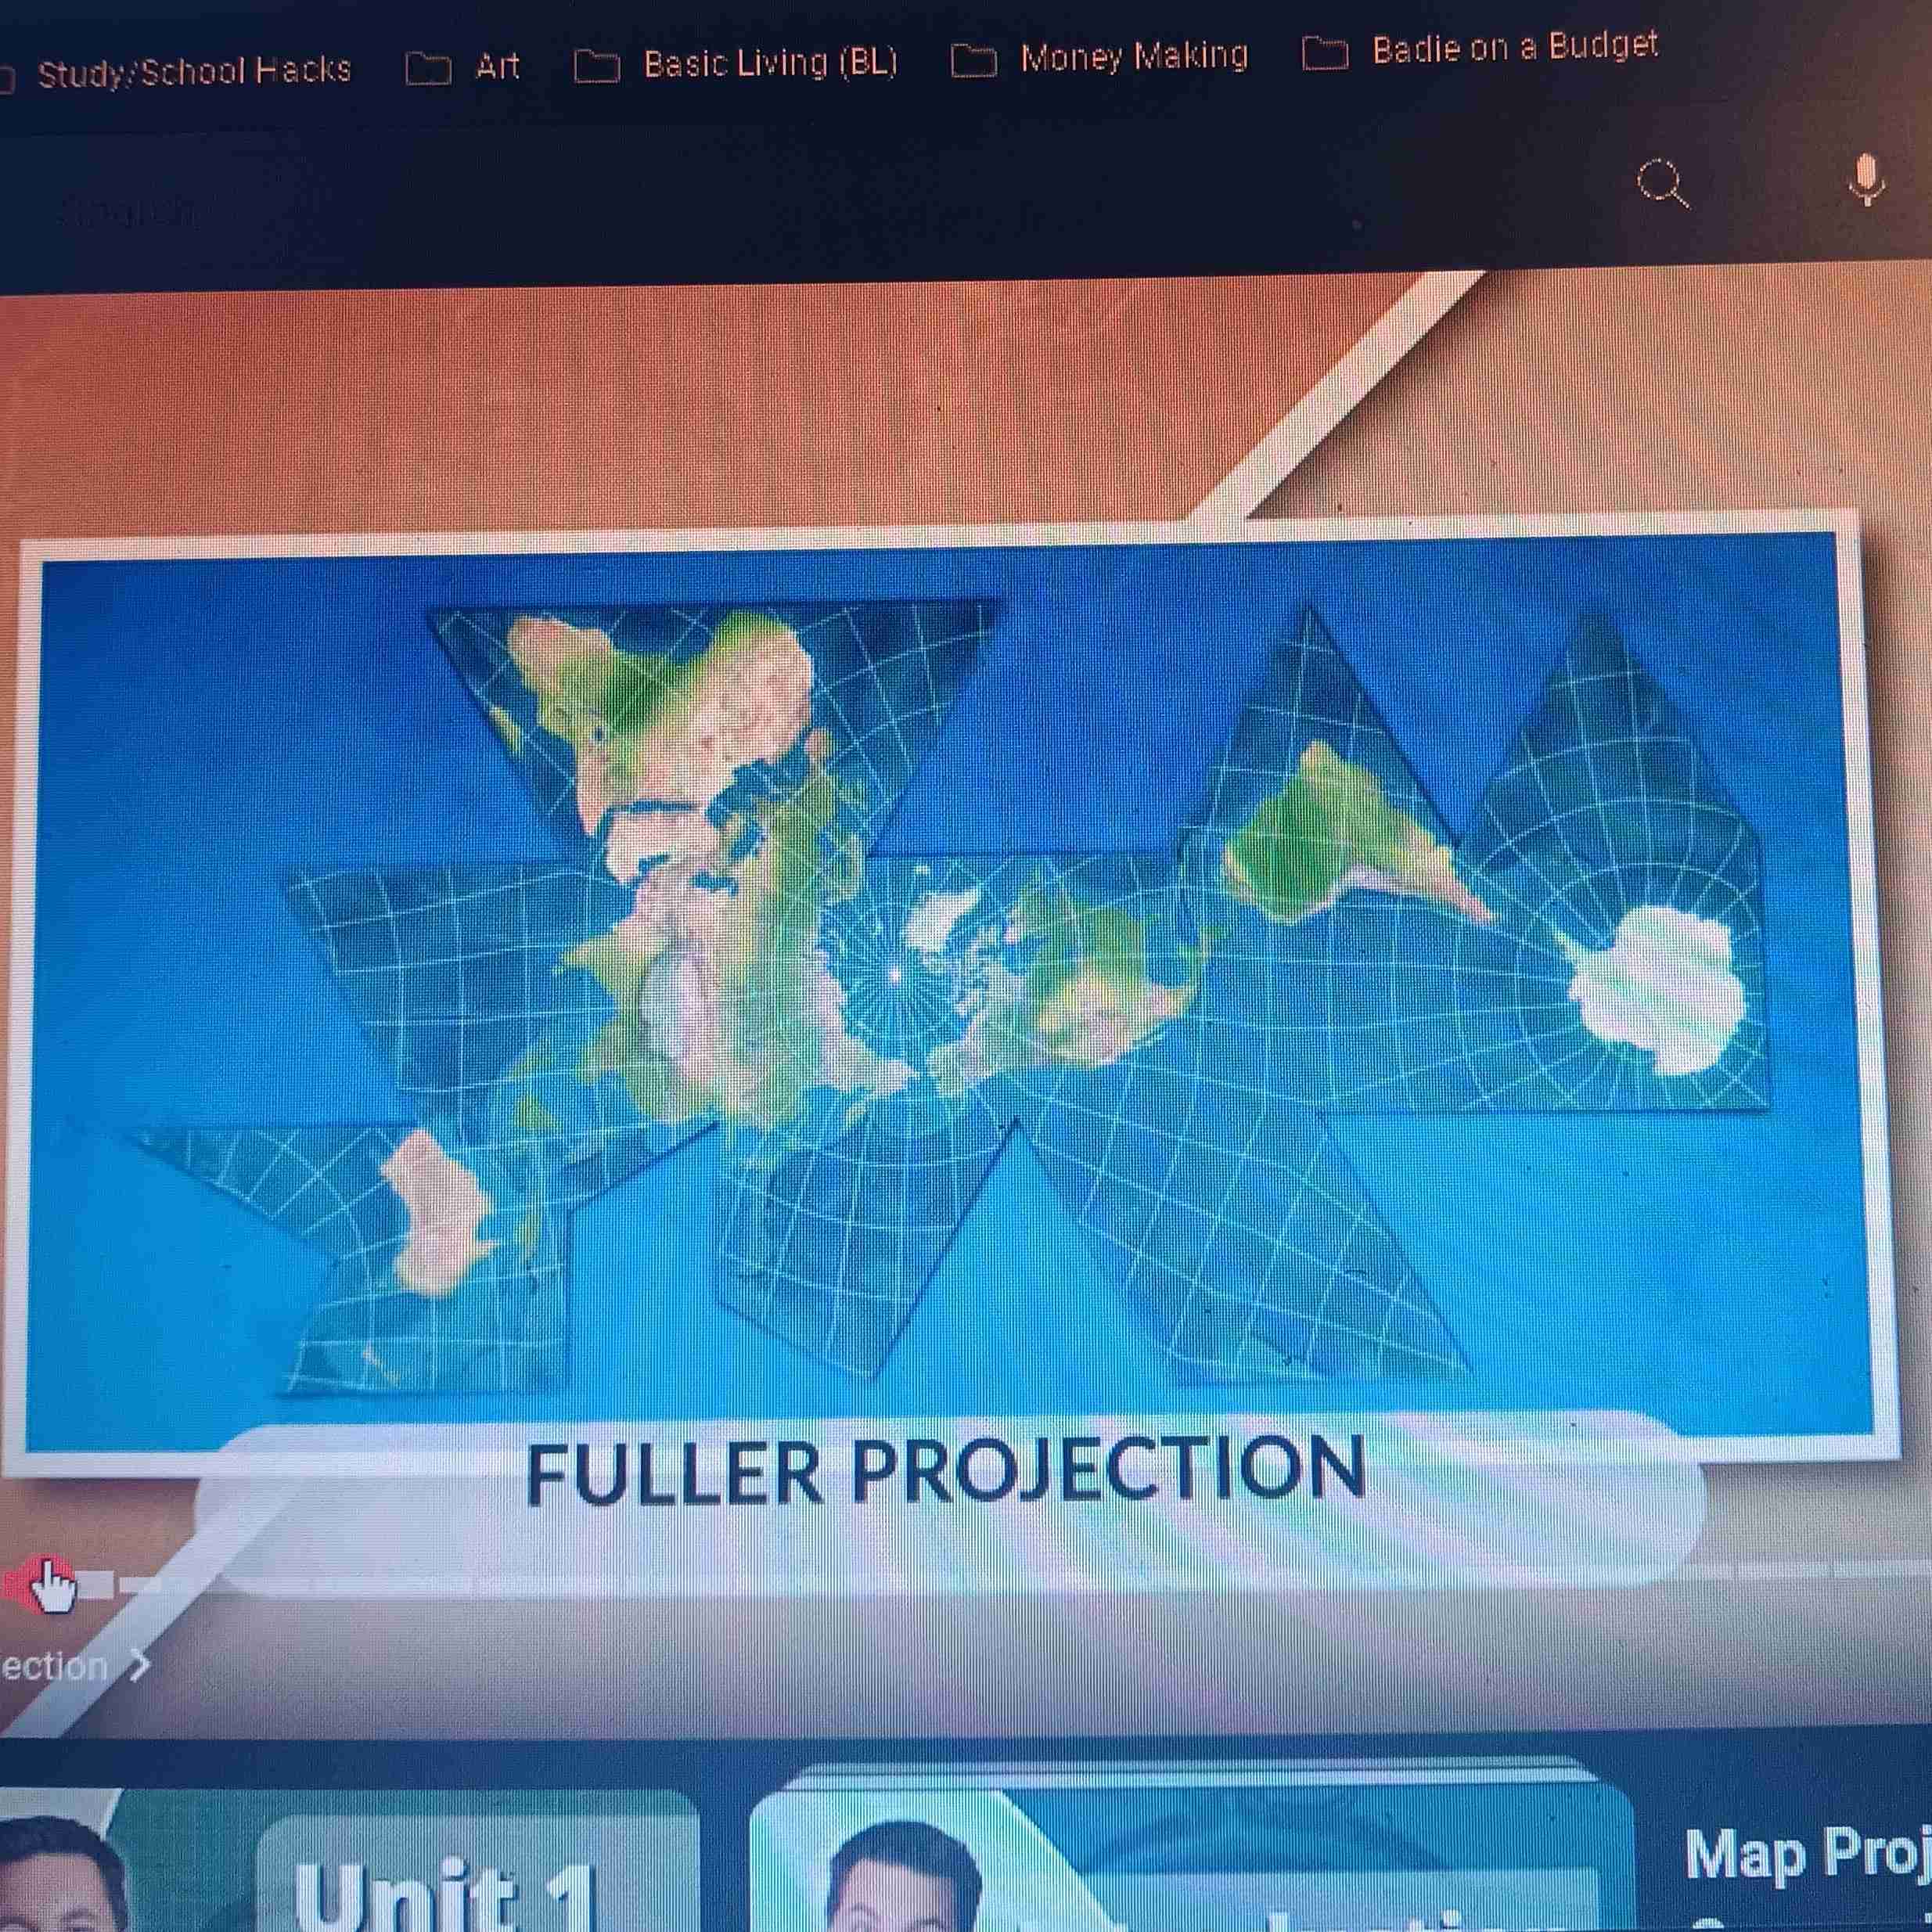 <p>Fuller Projection</p>